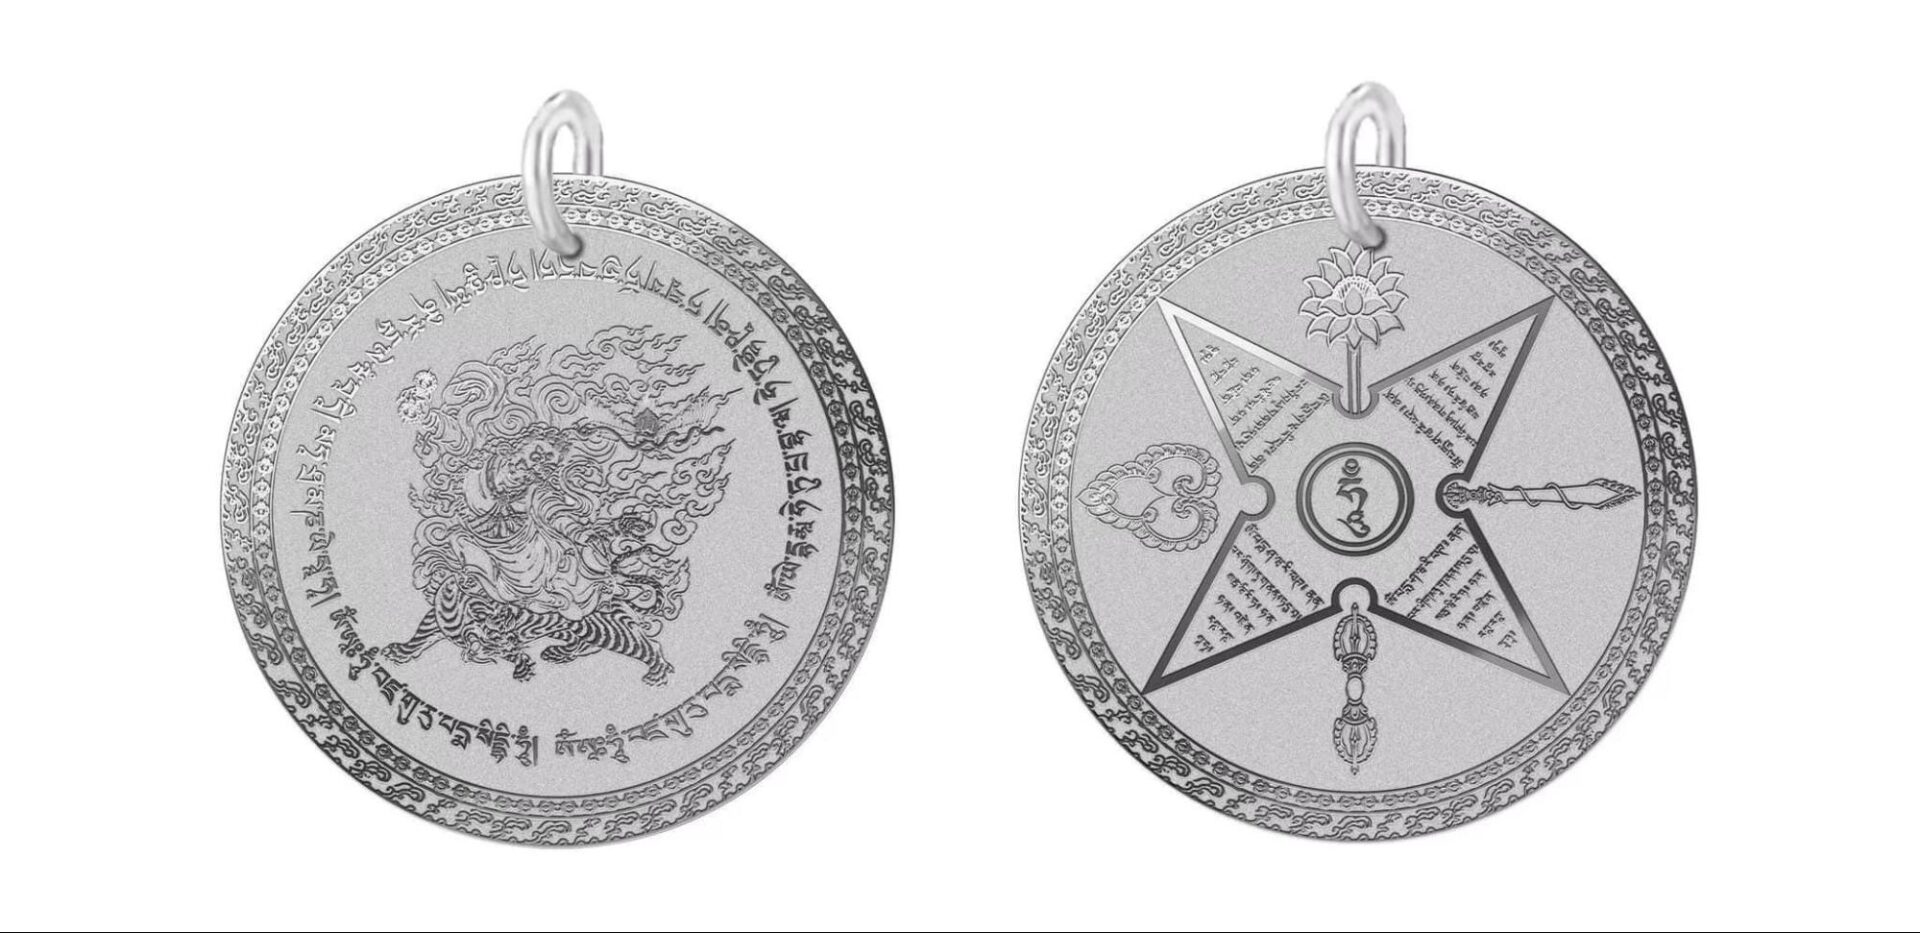 Two silver coins with designs on them